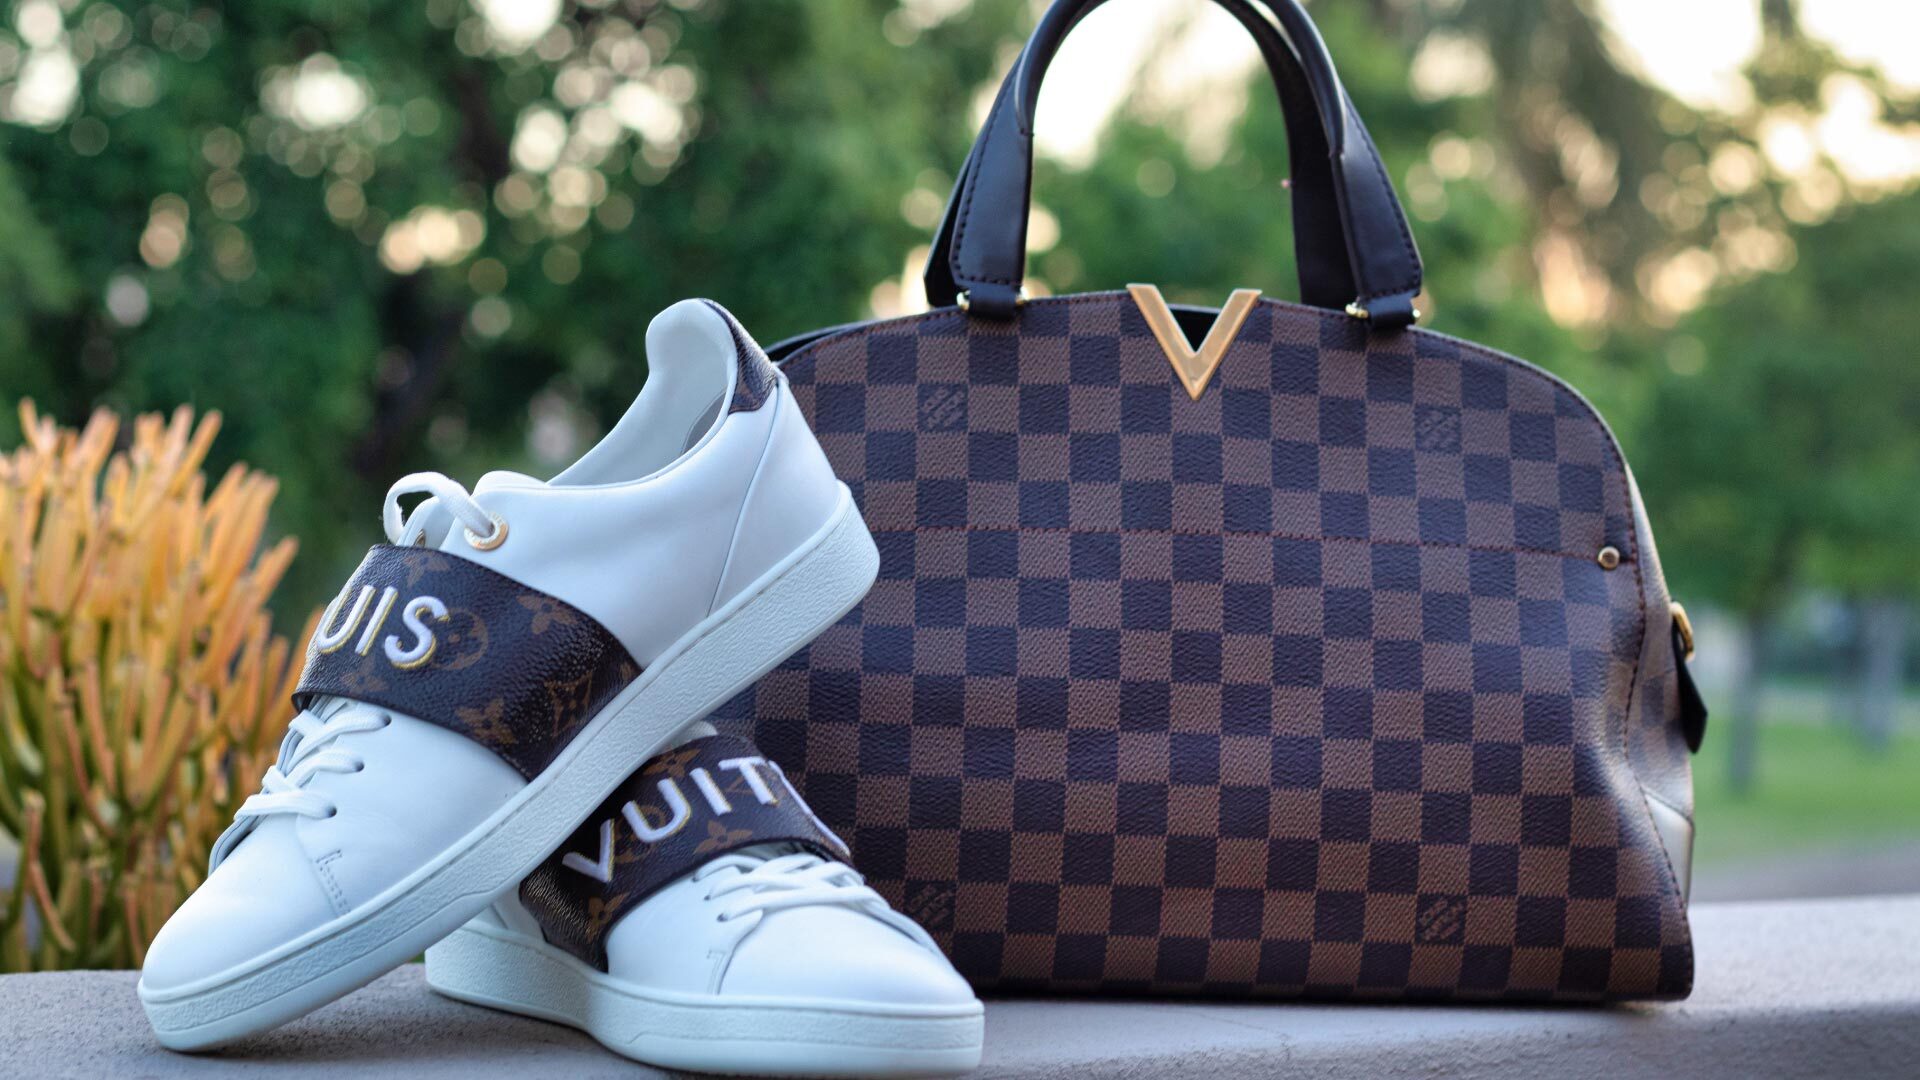 lv sneakers price in south africa